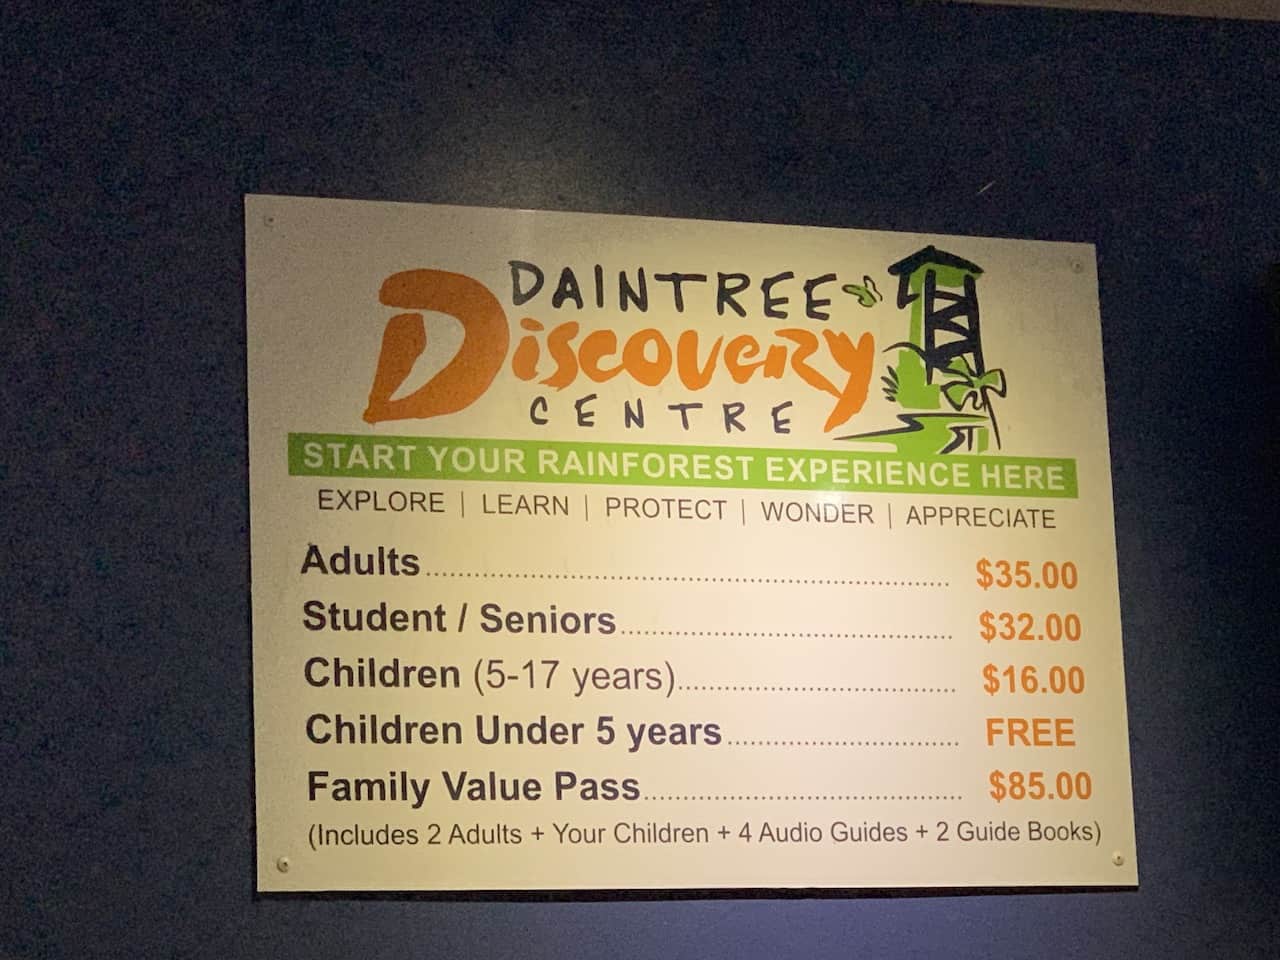 Daintree Discovery Centre Prices